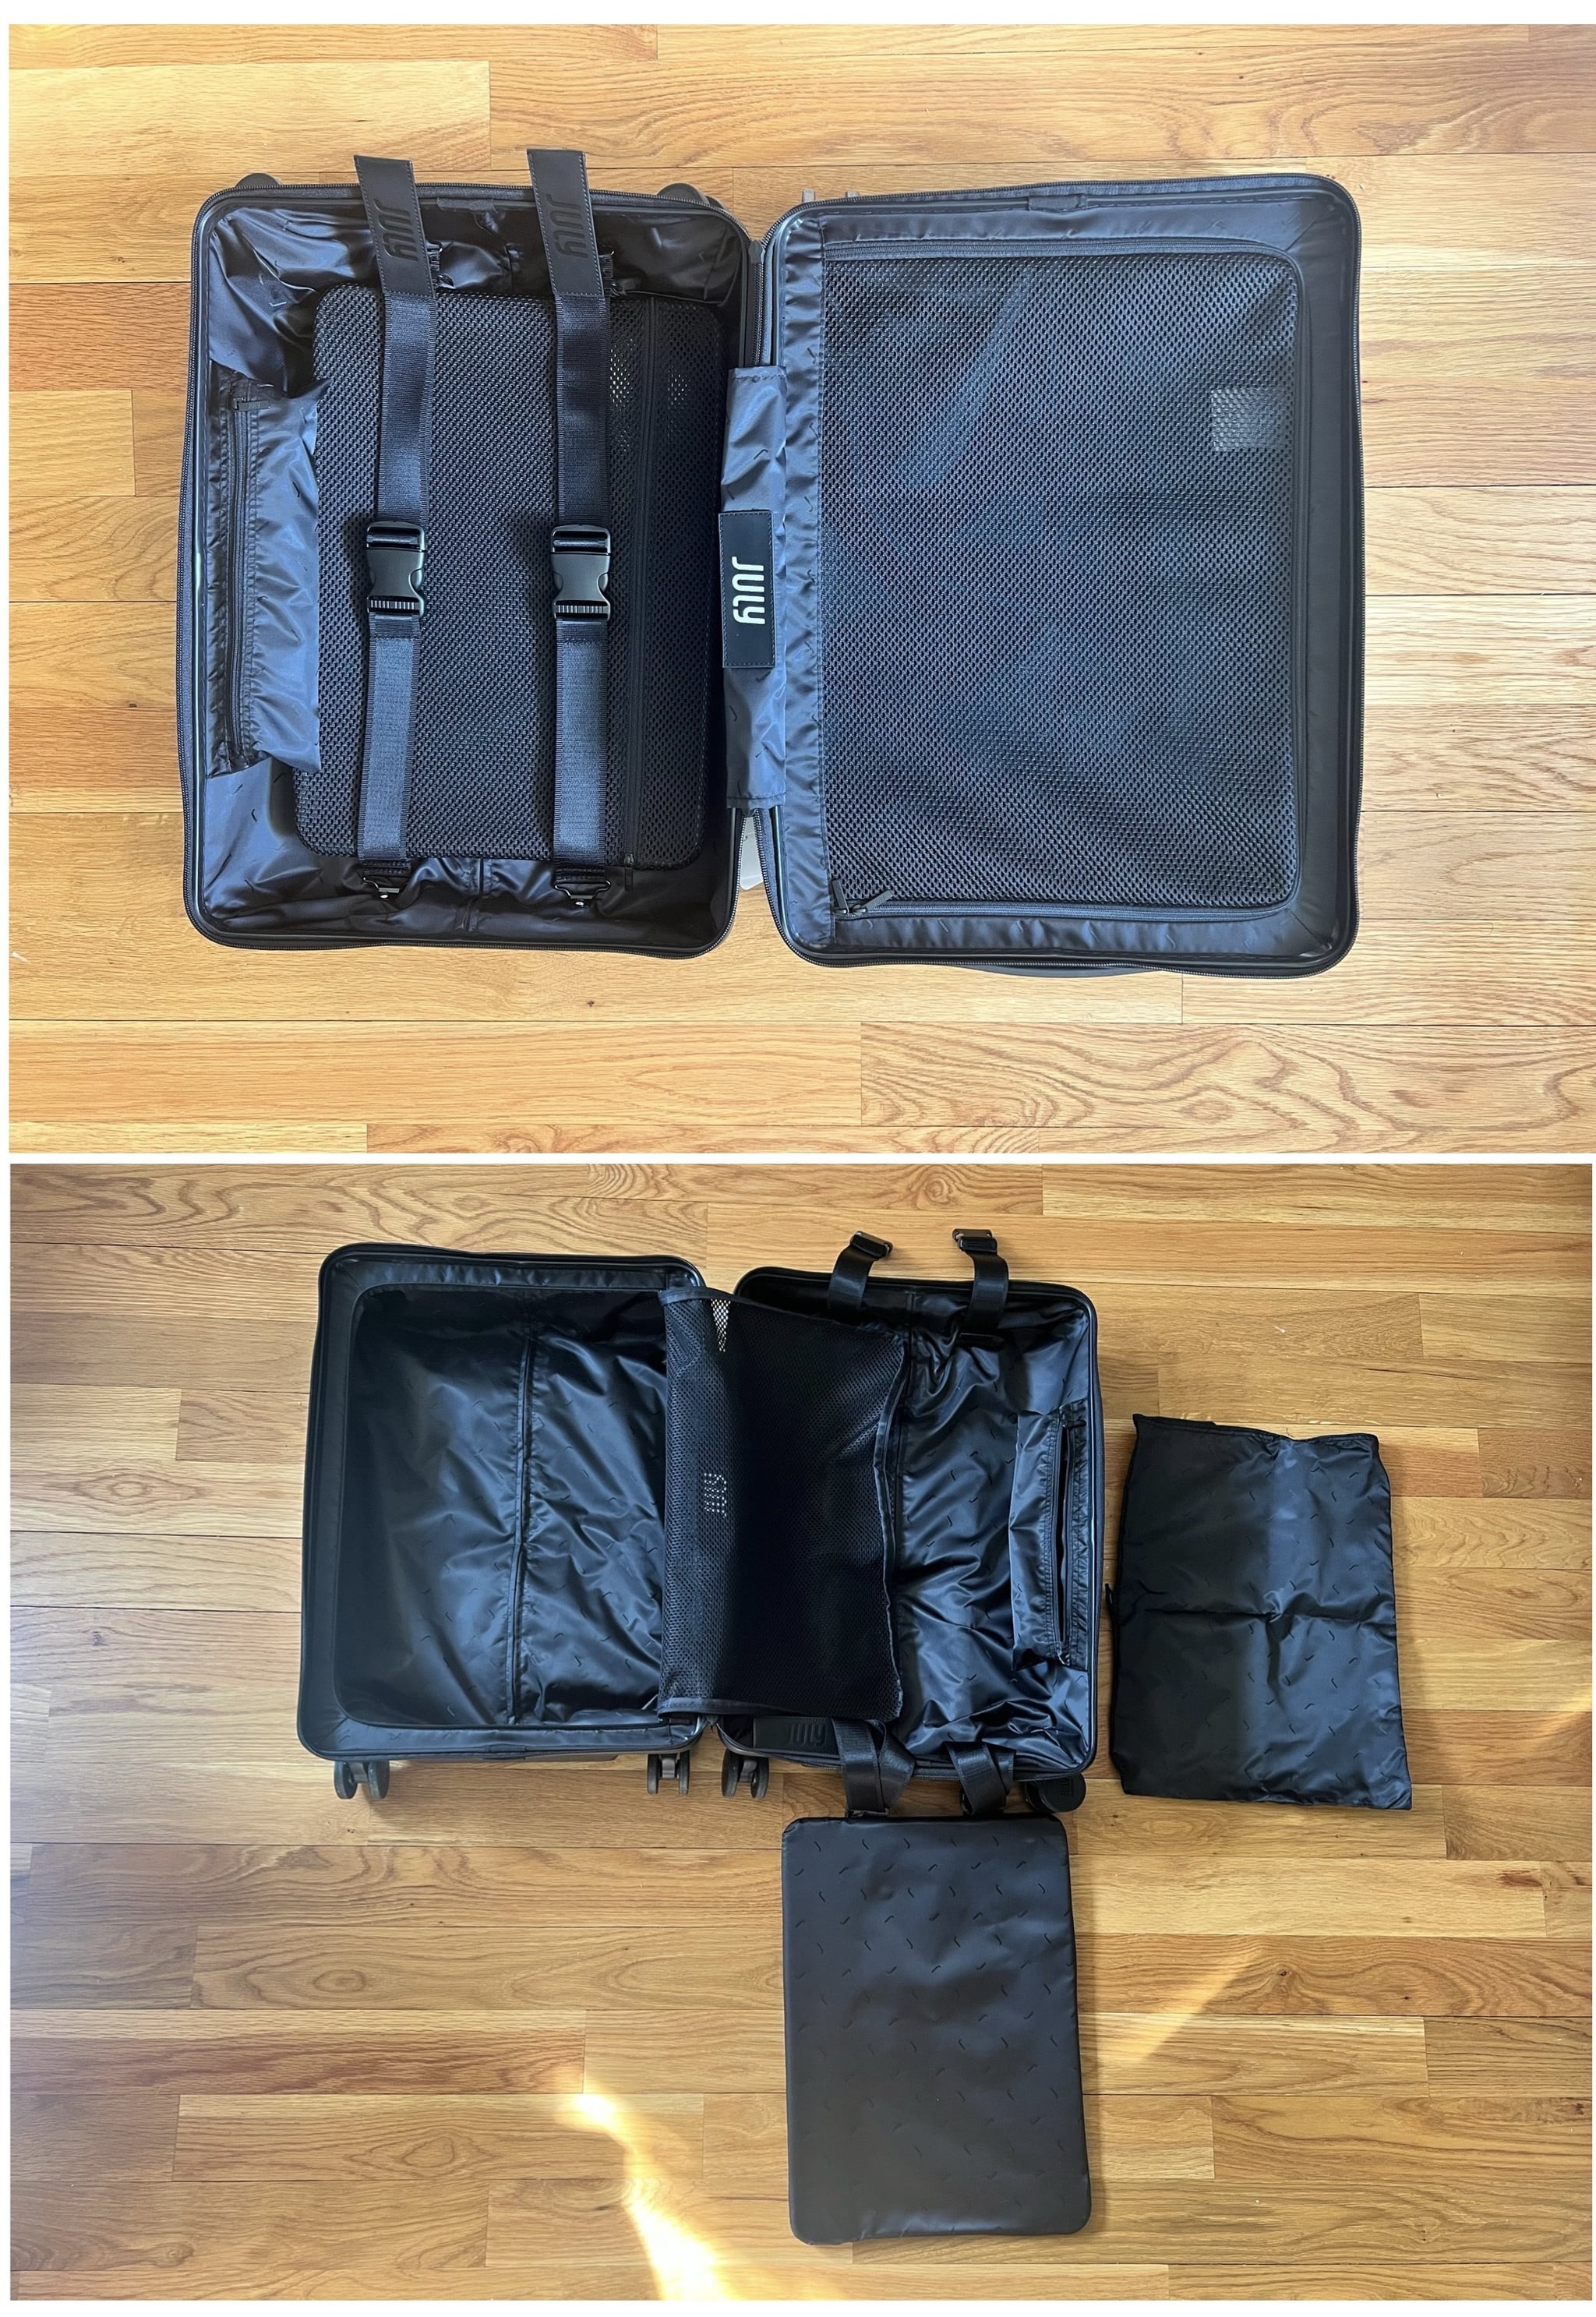 The July Carry-On Pro suitcase in empty anthracite.